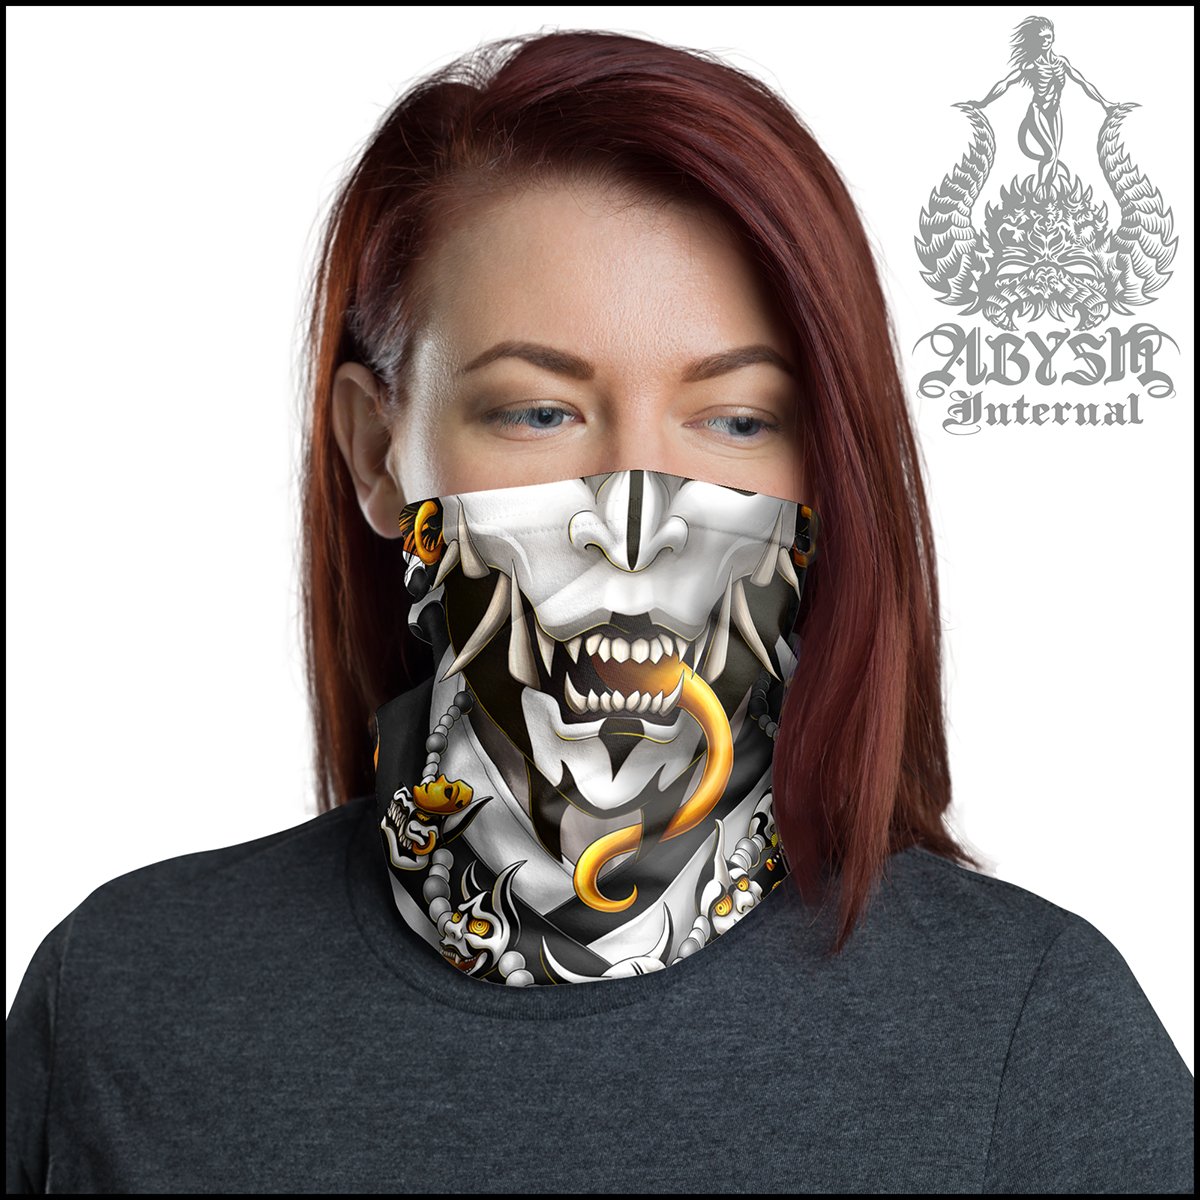 Demon Neck Gaiter, Oni Face Mask, Japanese Hannya Printed Head Covering, Graffiti Street Outfit, Snake, Fangs, Headband - Black and White - Abysm Internal